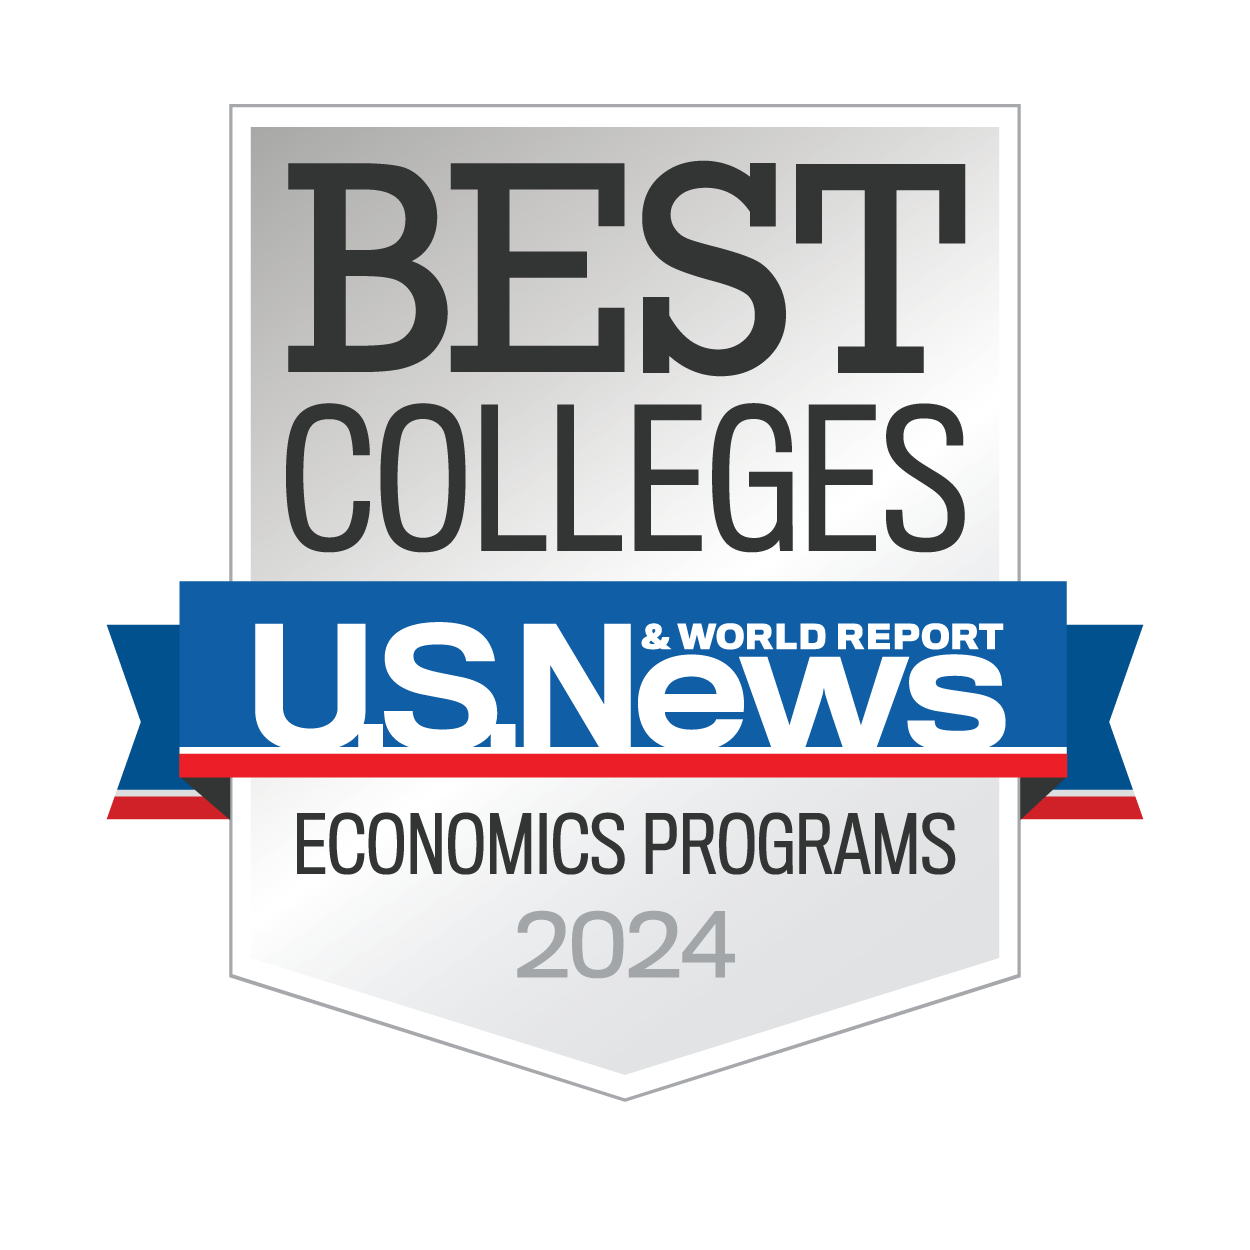 Named a Best College 2024 by U.S. News & World Report